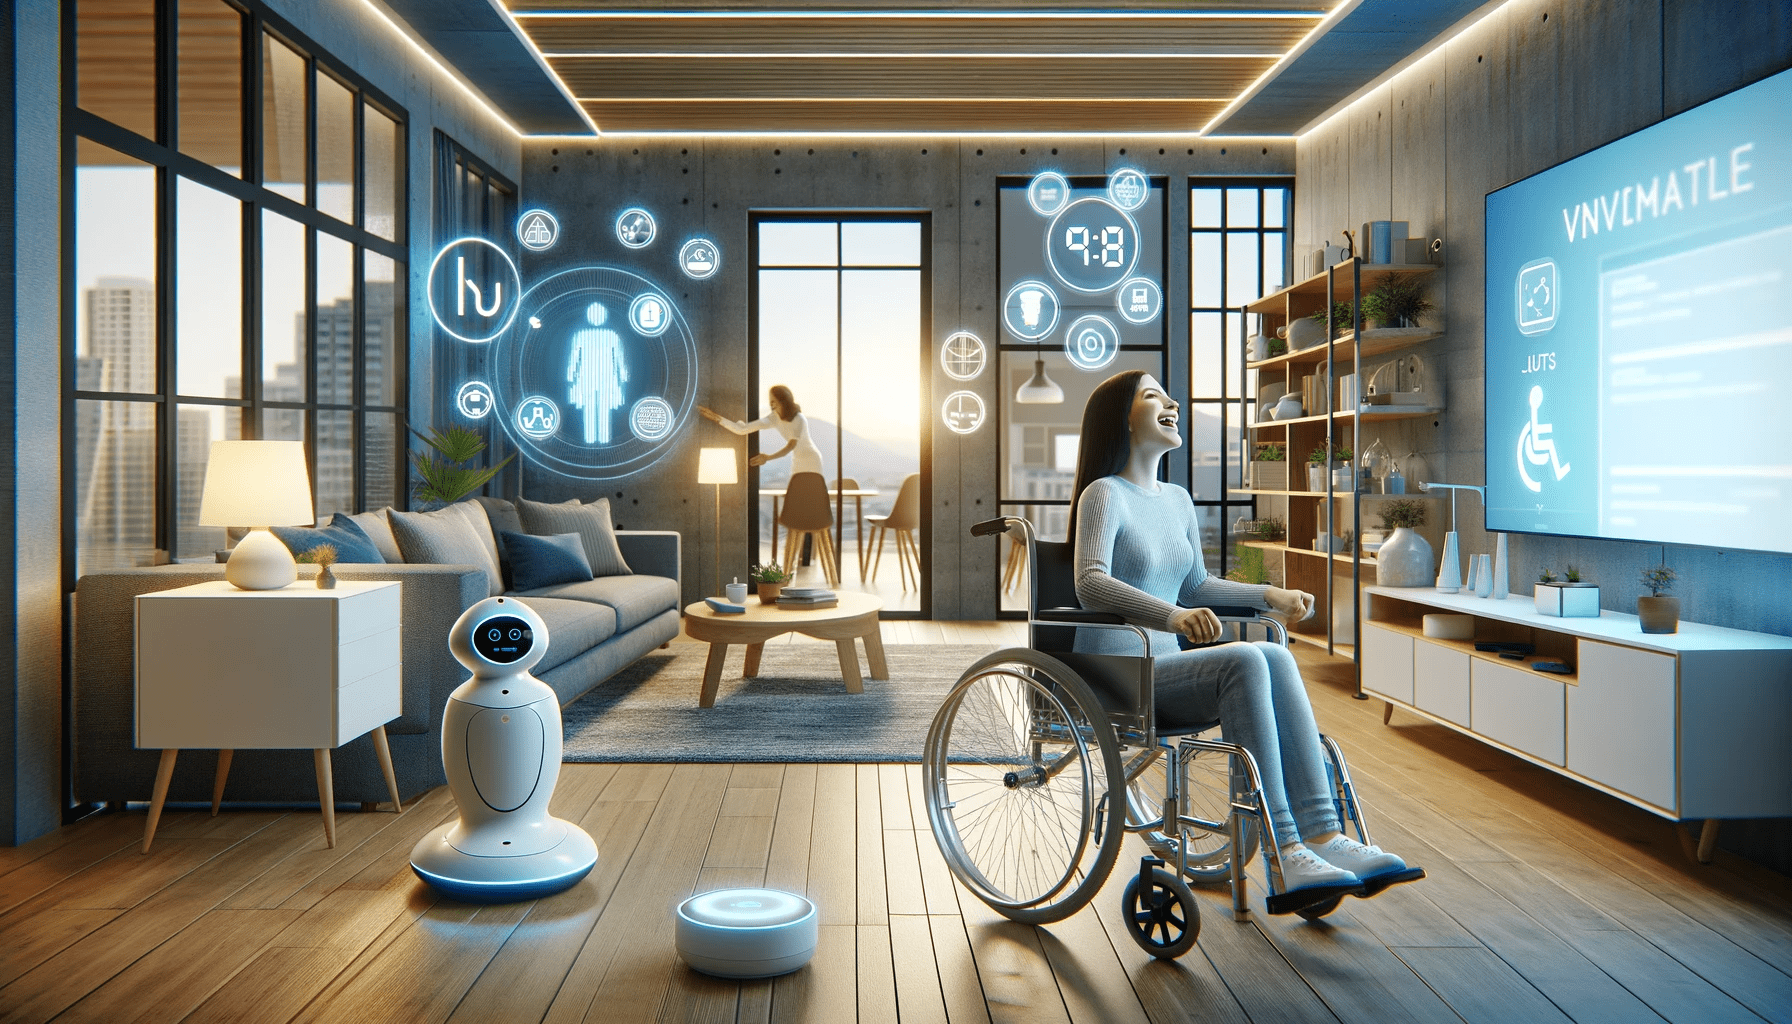  a joyful person in a wheelchair in a modern, AI-enhanced living space, highlighting the comfort and accessibility of the environment. A young woman looks at a screen, the room is modern with a woooden floor and pastel furnishings. They is a small assitant robot droid in the room.